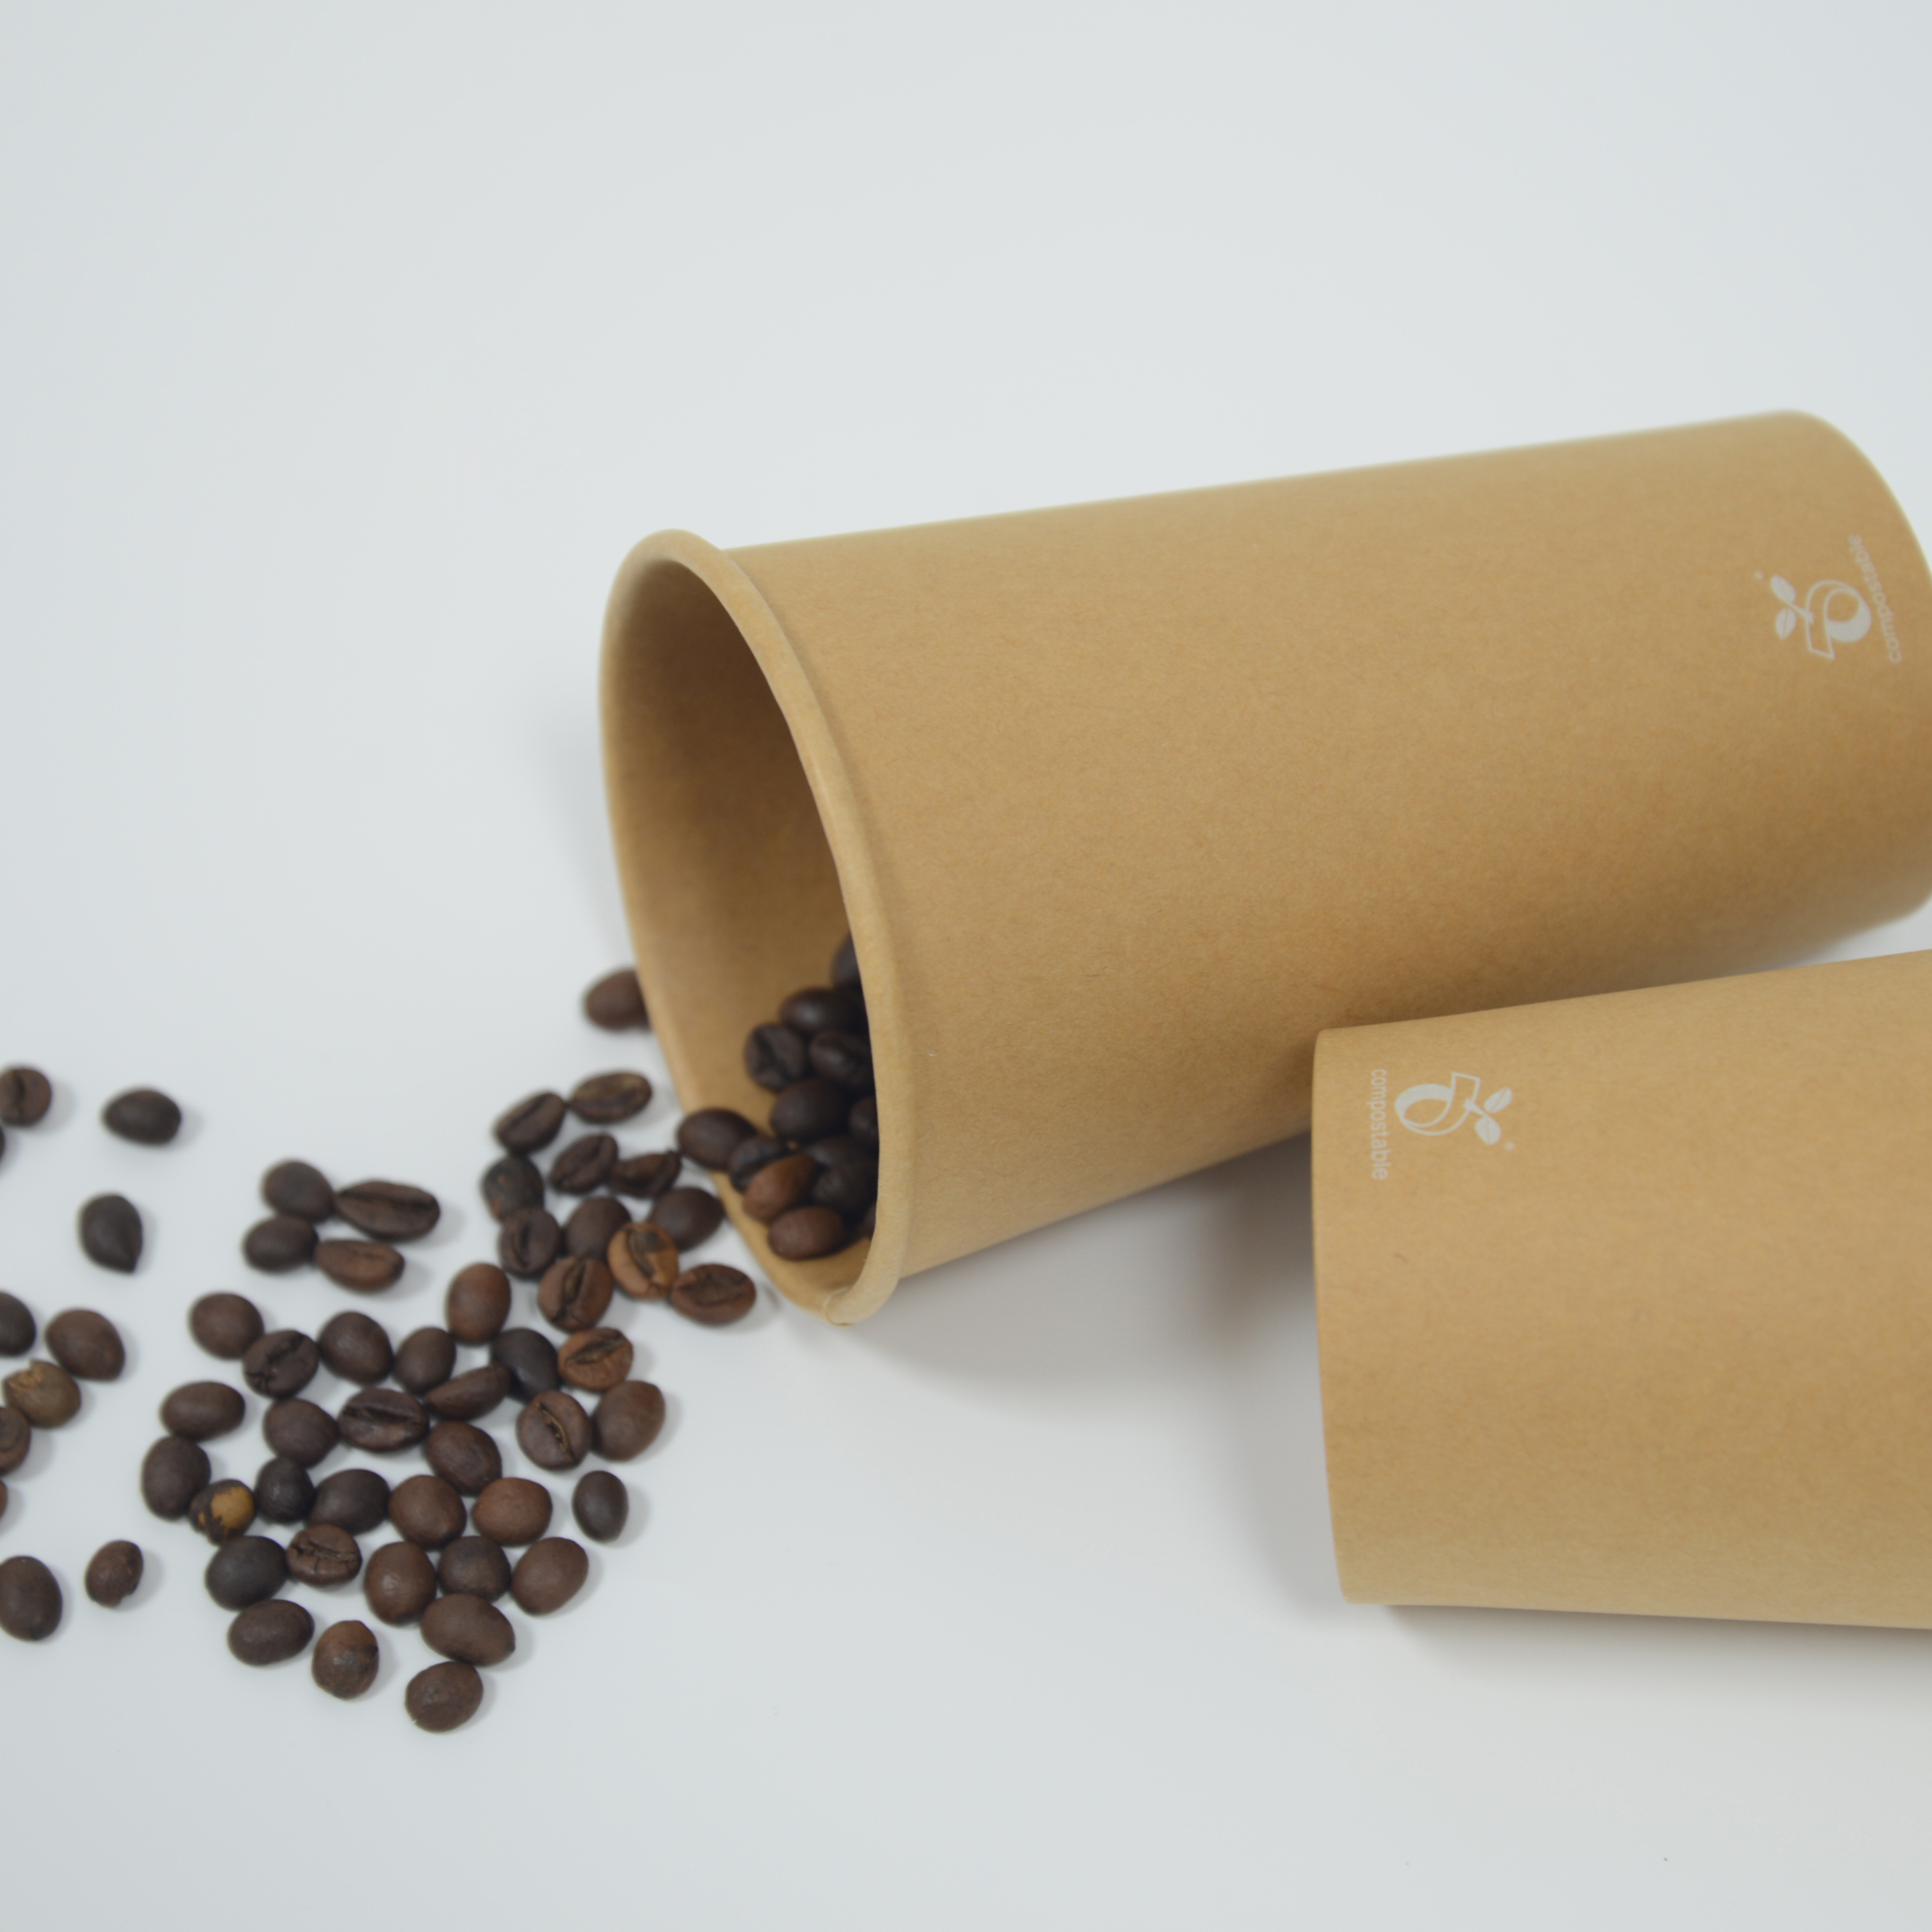 Coffee chains trial fully compostable cup – Becky Johnson reports